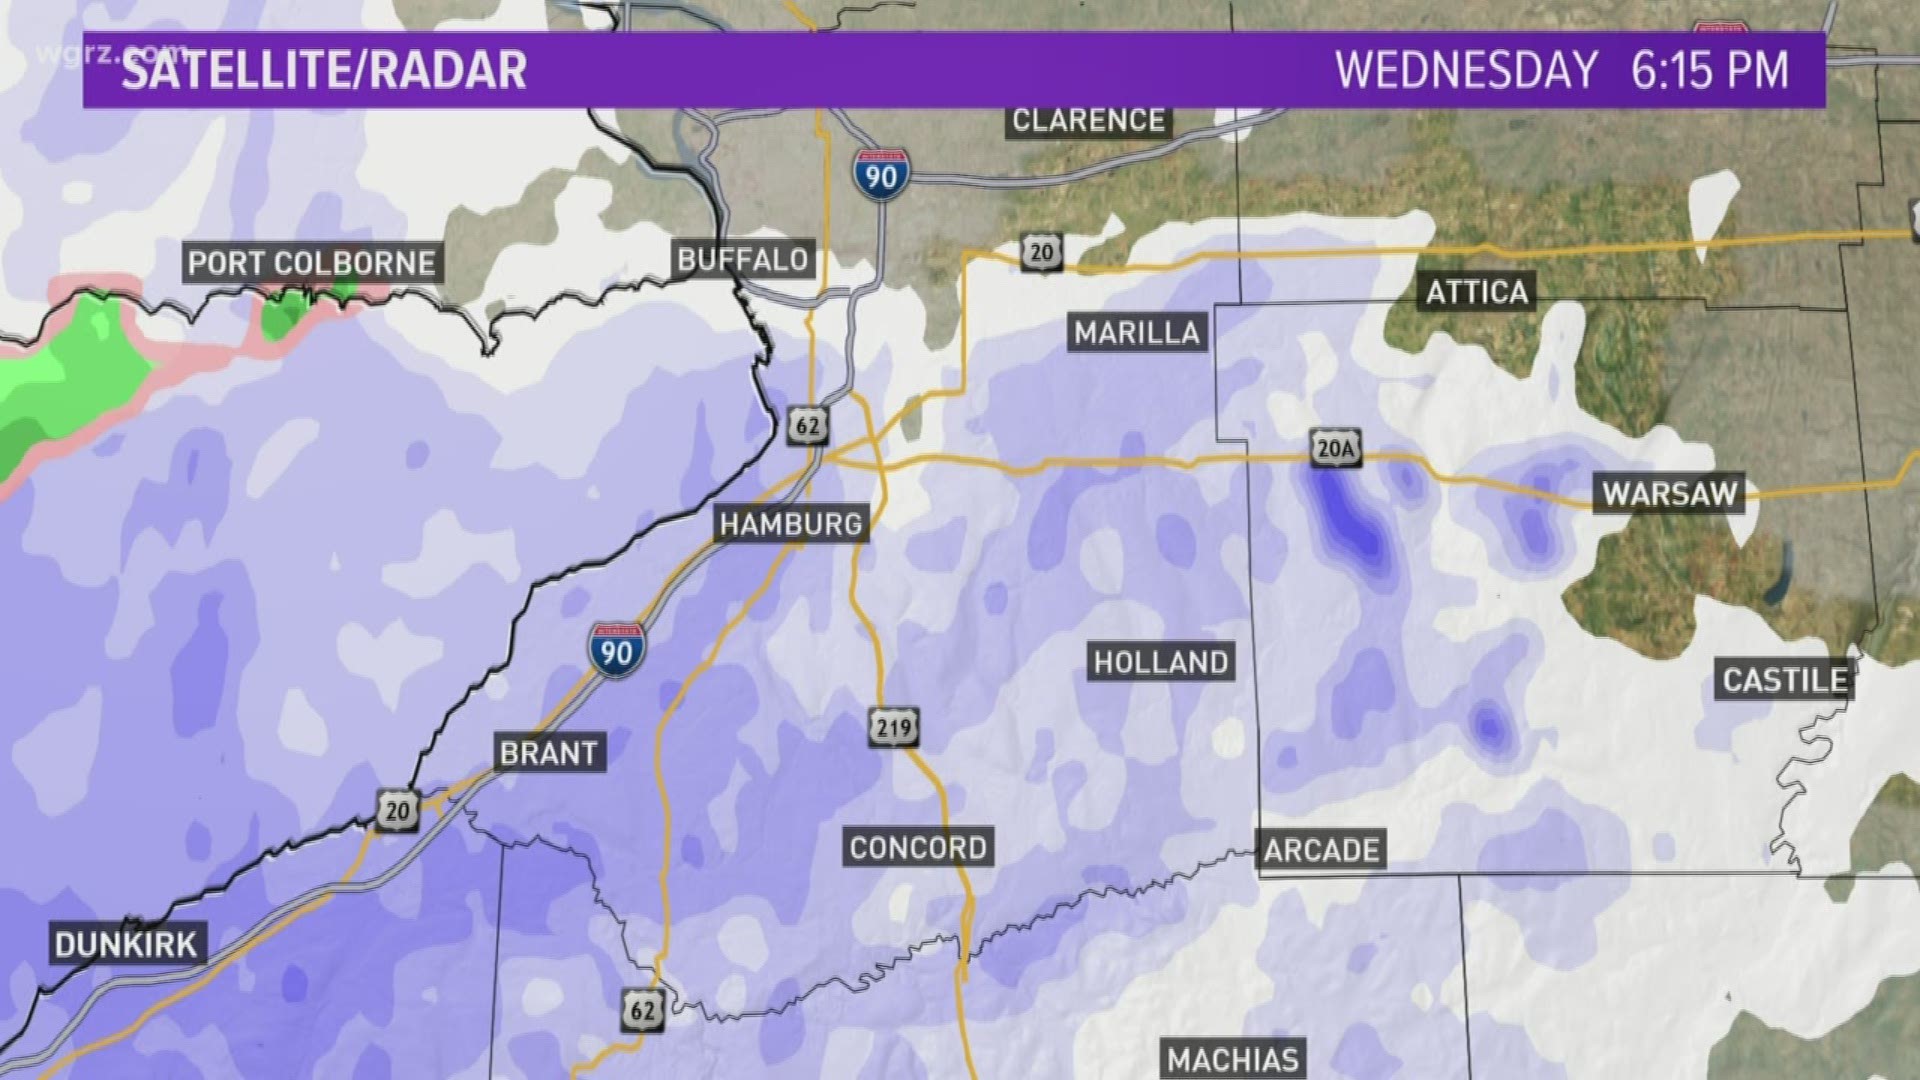 A winter weather advisory is in effect for S. Erie
Chautauqua, Cattaraugus and Wyoming Co. until tomorrow at 10 am.